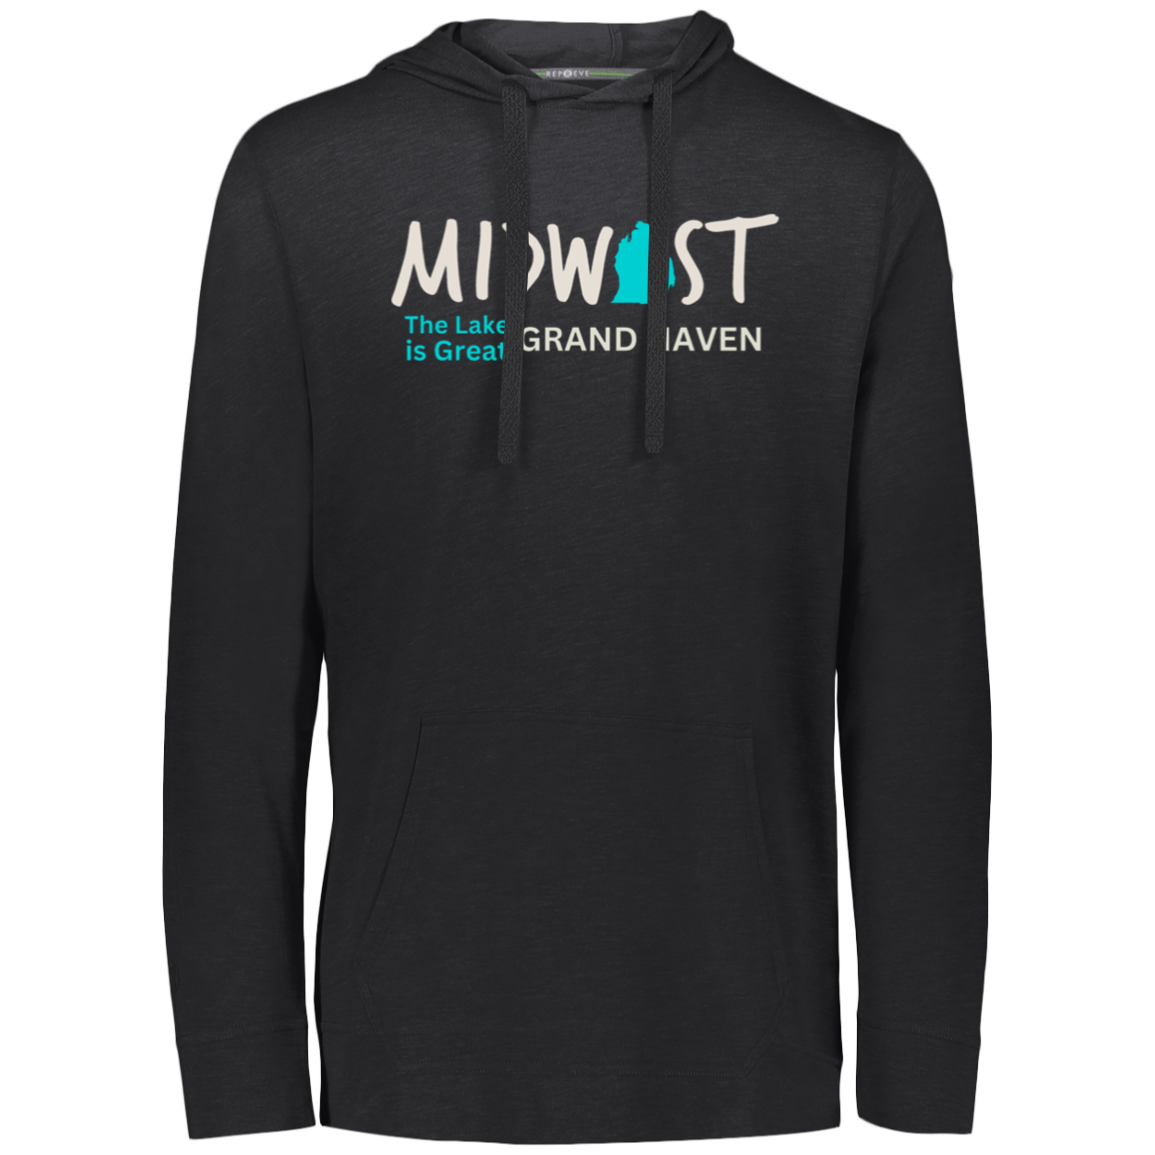 Midwest The Lake is Great Grand Haven Eco Lightweight Hoodie